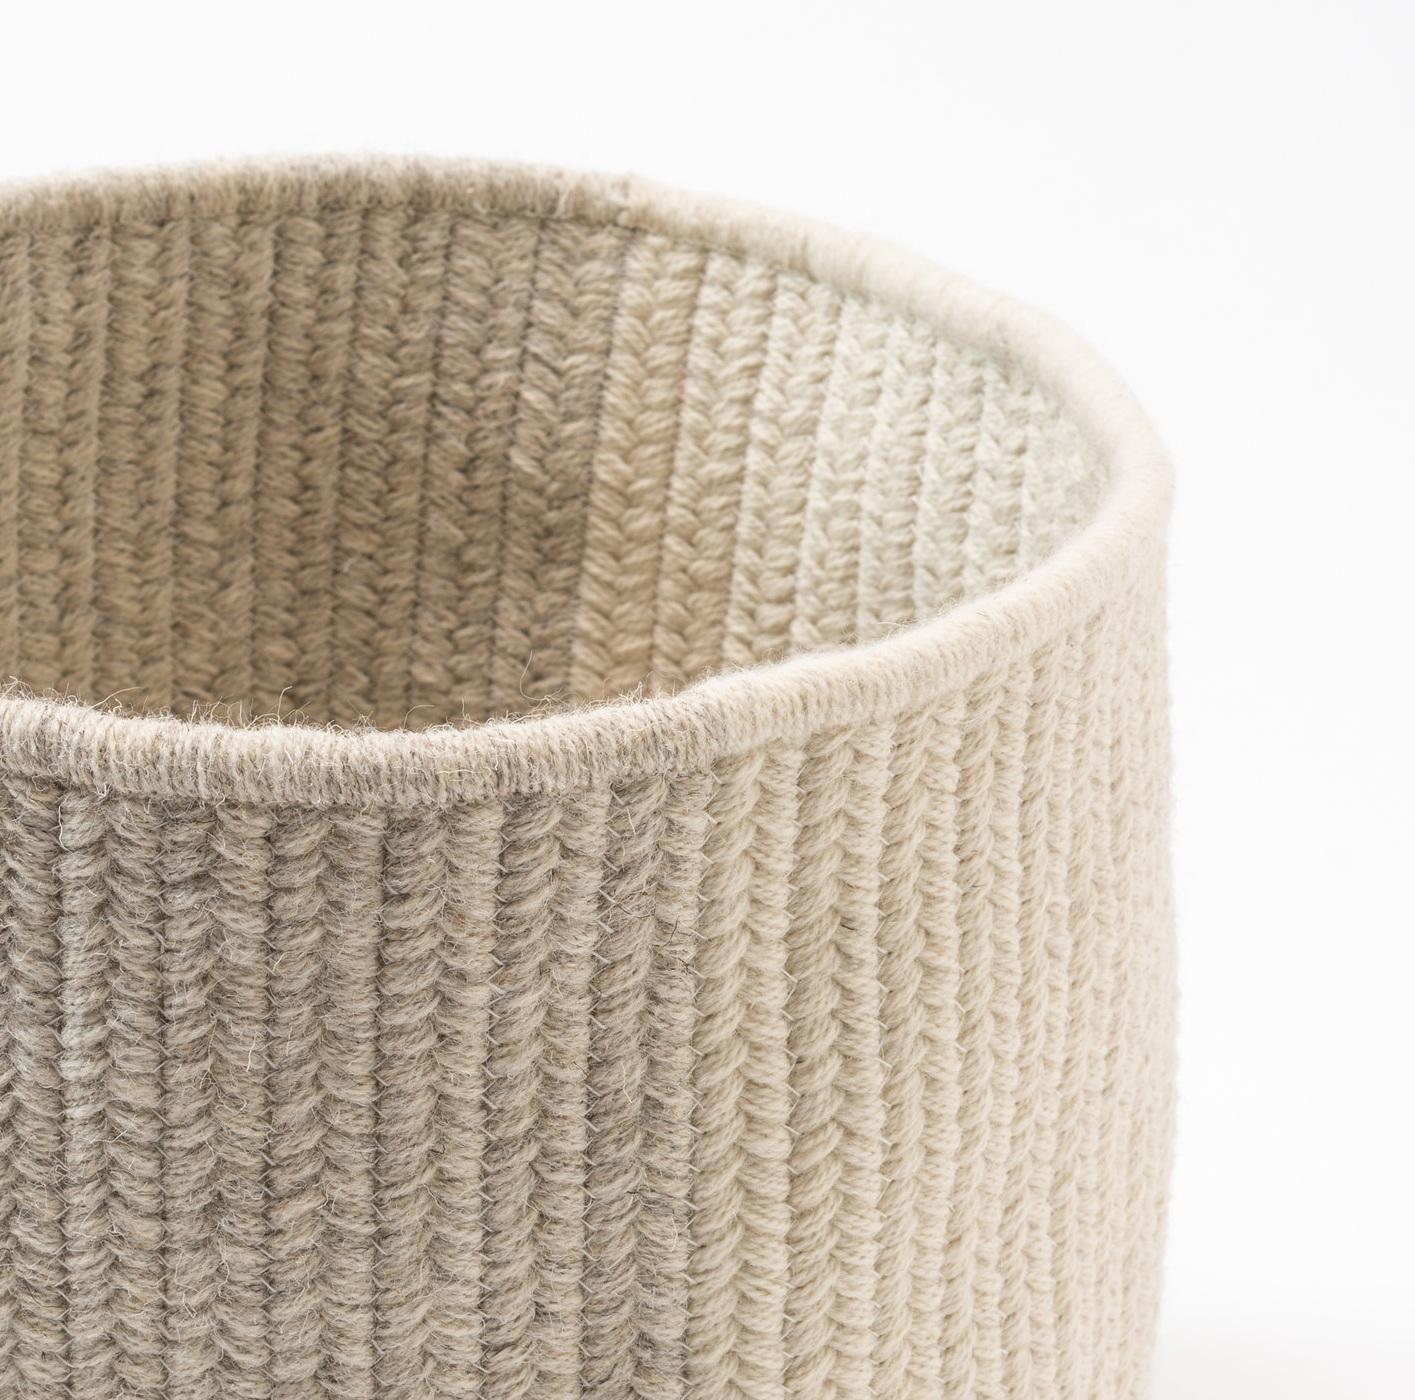 Vertical flat woven braids combine contrasting tones in this round basket. Light grey and cream natural un-dyed wool yarns sewn with white cotton thread.

Designed by Meredith Thayer in her South Boston studio and made to order in Rhode Island. We